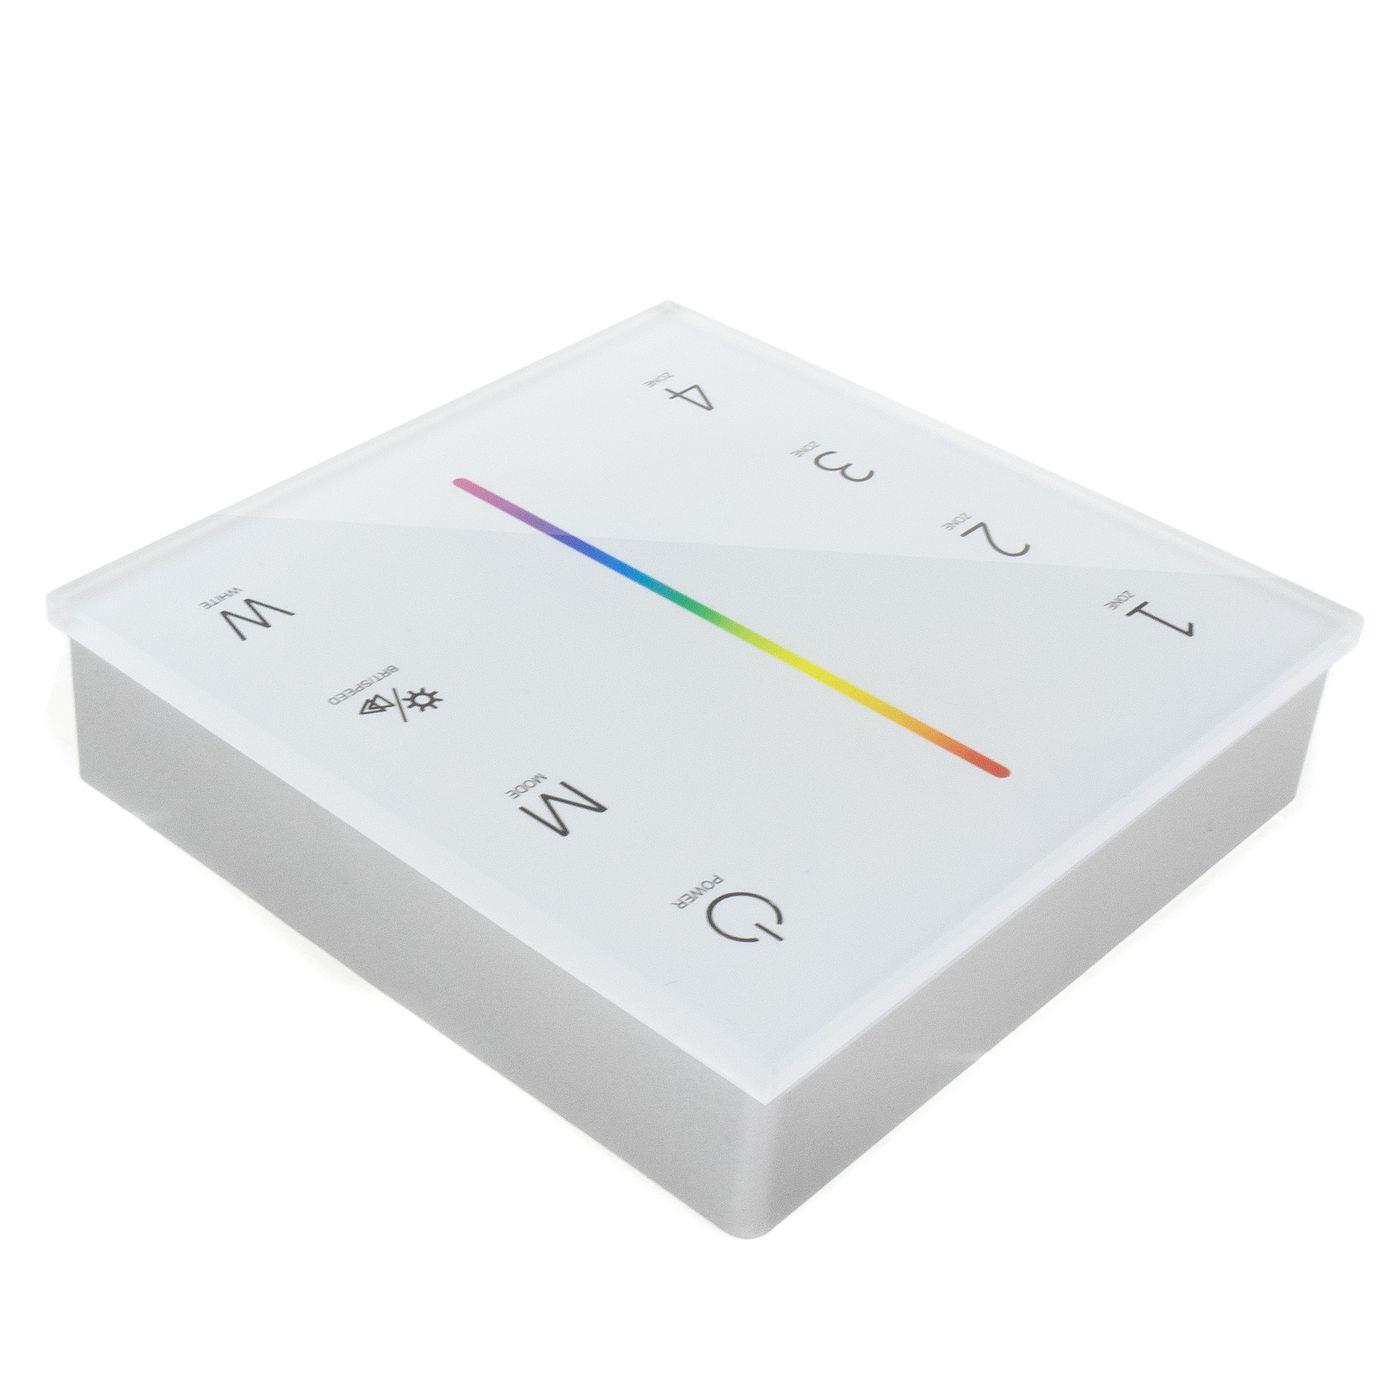 Elegance RGB RGBW LED 4-Zone Wall Touch Panel Controller Battery for colour changing strips 4-Pin + 5-Pin